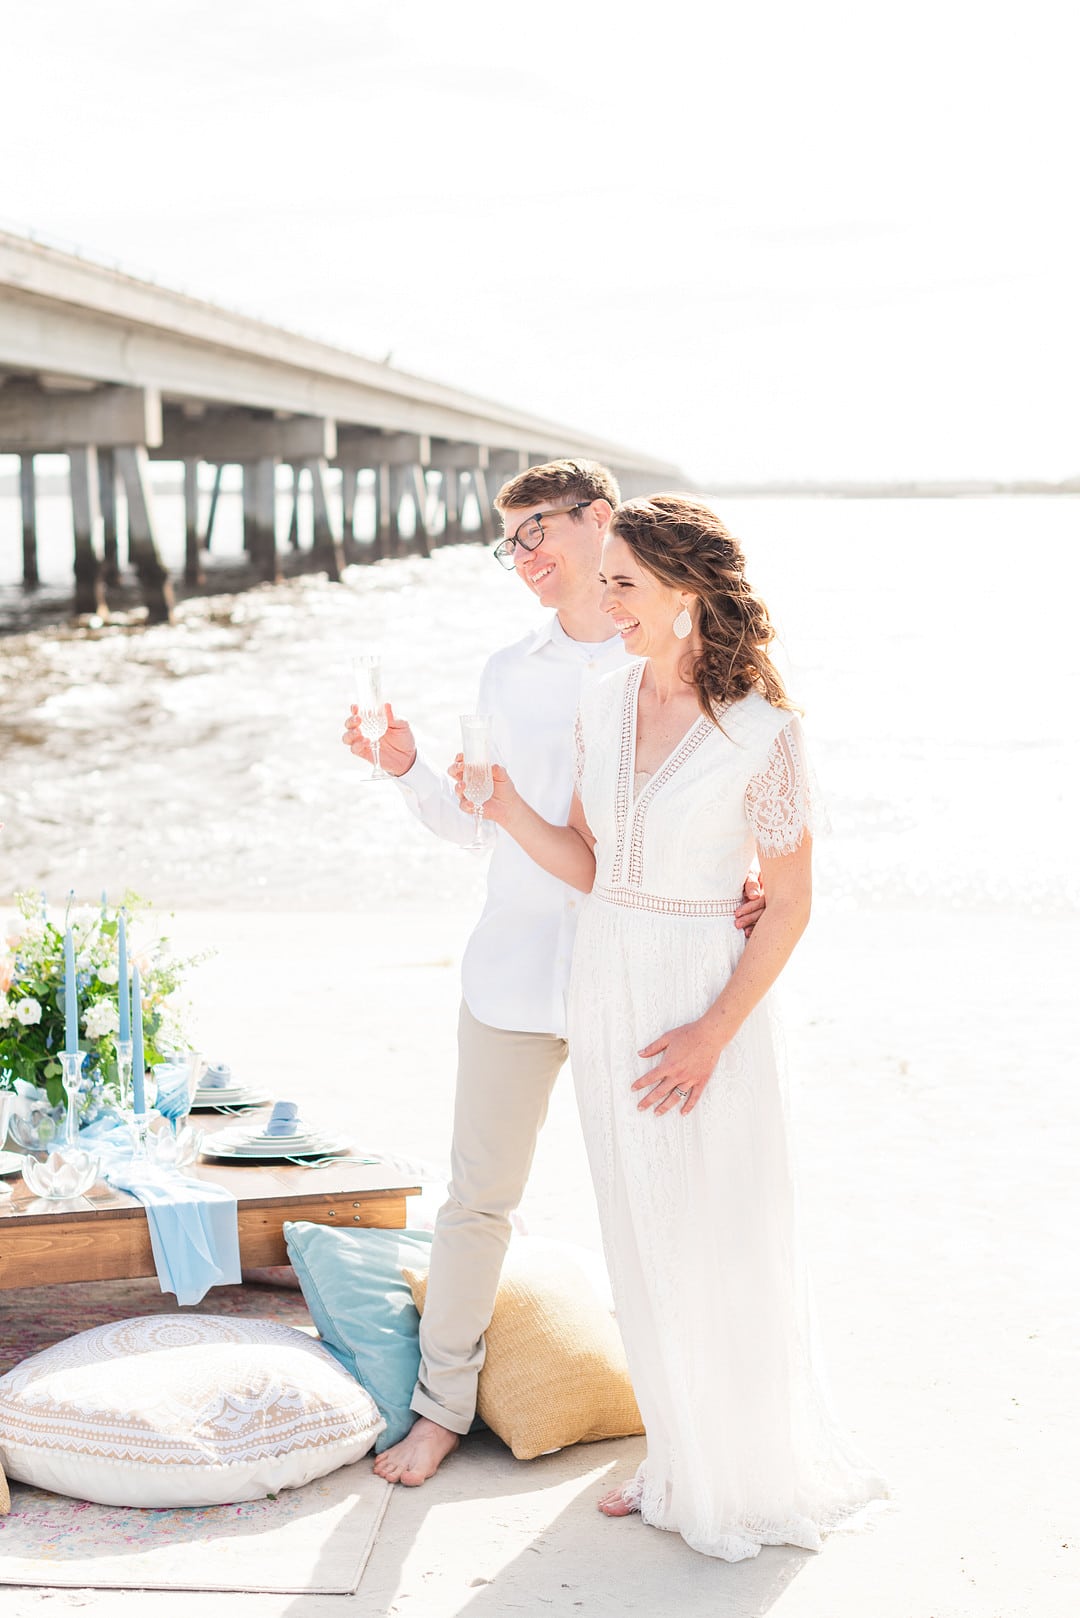 Romantic, Spring Styled Wedding with Horses on the Beach_Christine Austin Photography_©christineaustinphotography_2021_RomanticBeachStyledShoot_Austin+Naomi_59_low